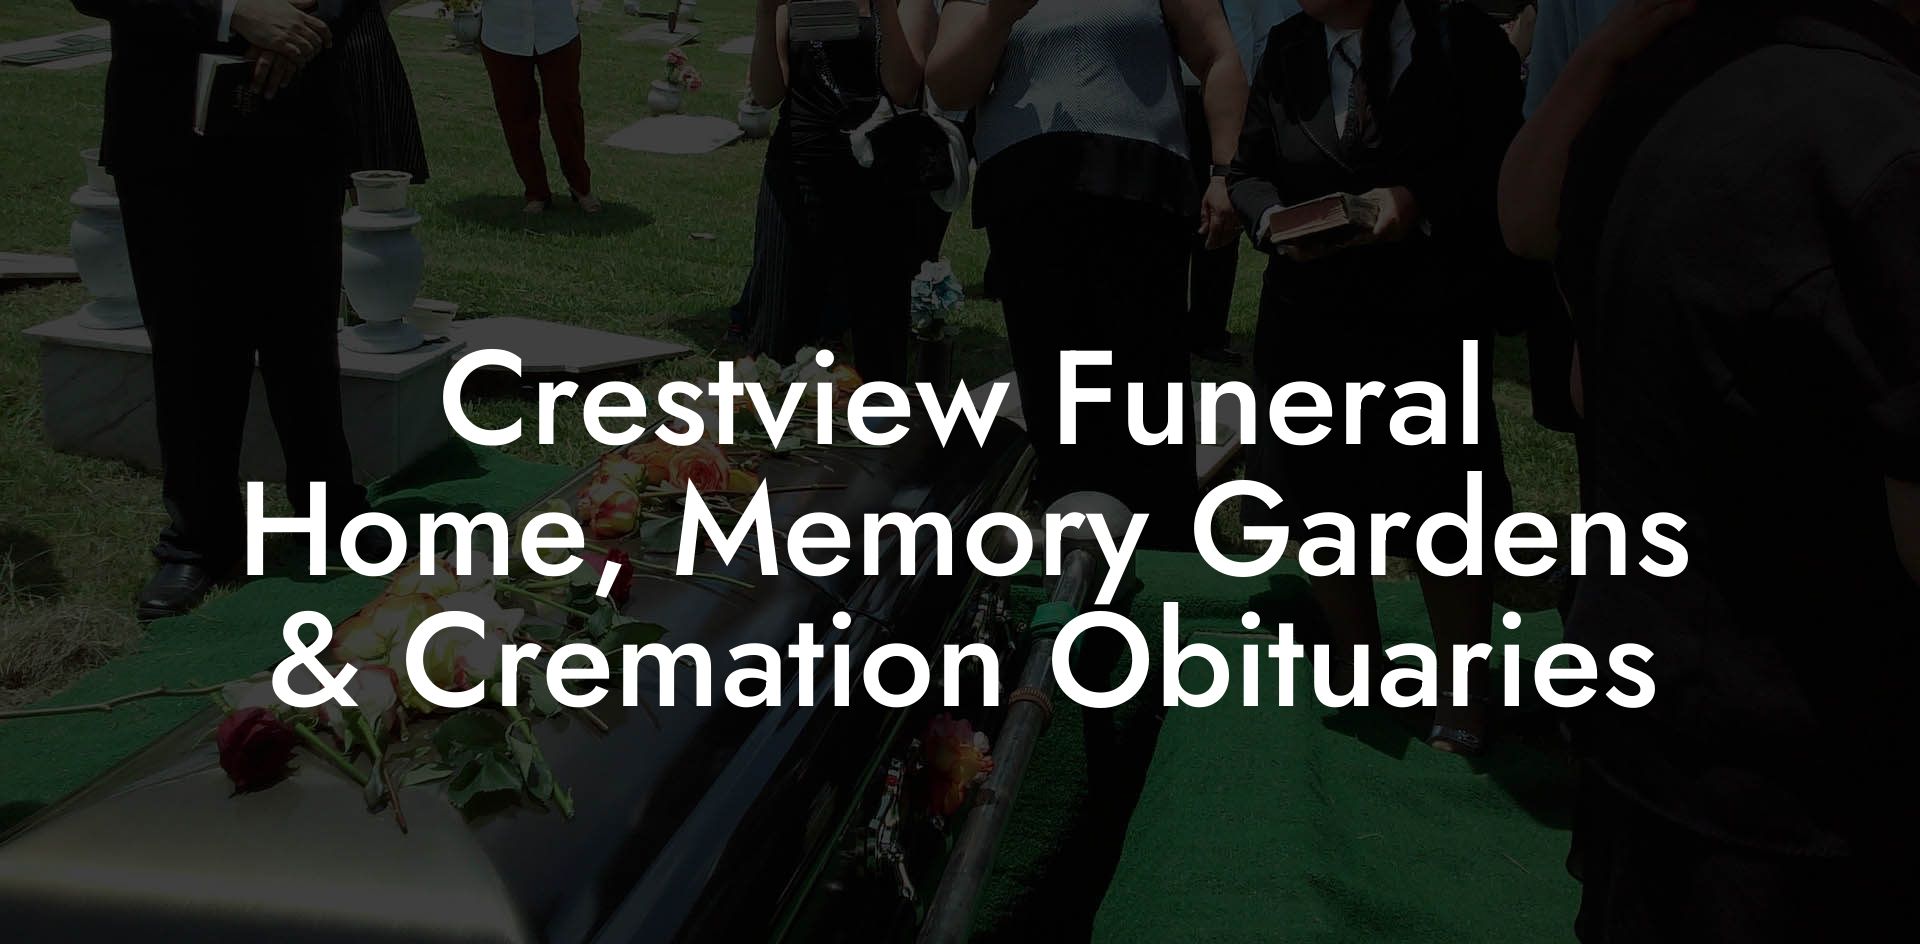 Crestview Funeral Home, Memory Gardens & Cremation Obituaries